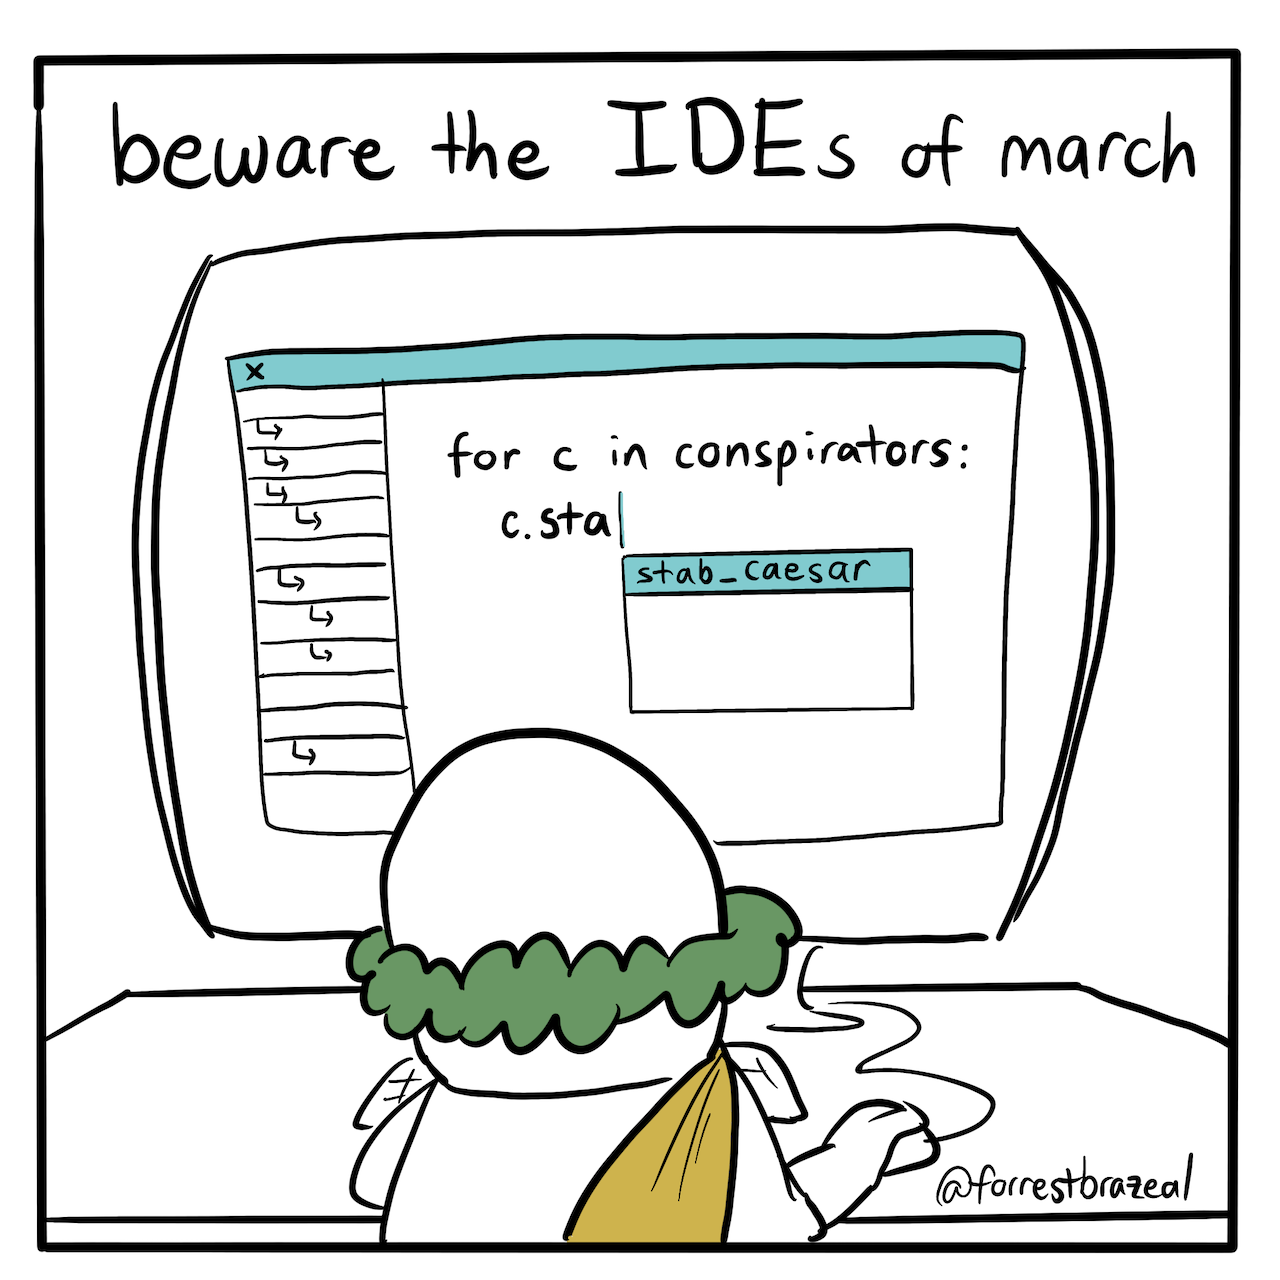 IDEs of March